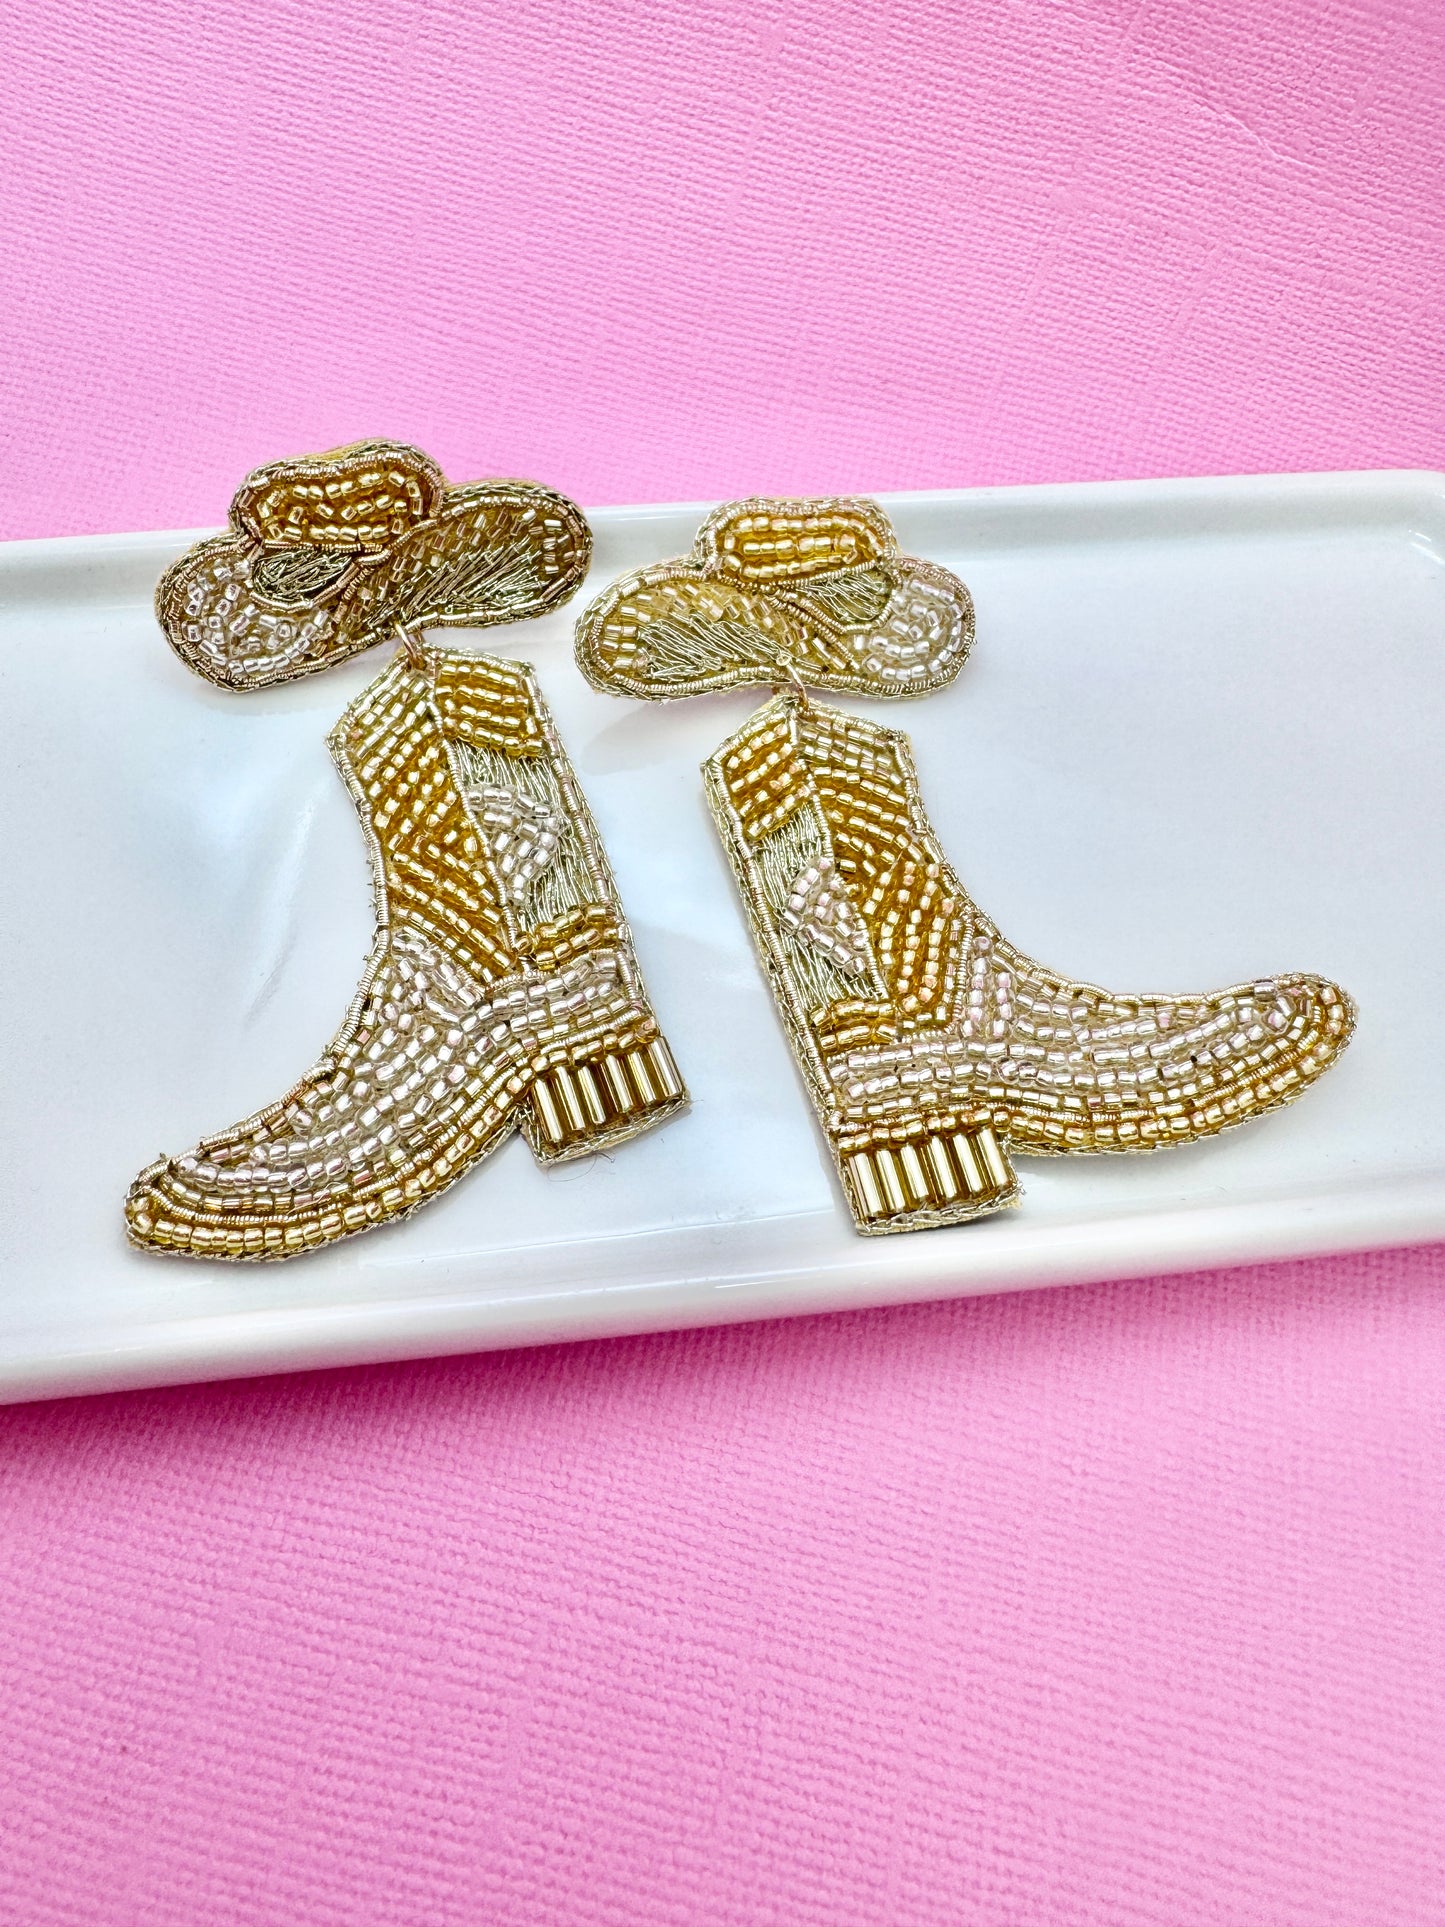 Silver and Gold Cowboy Boot and Hat Earrings